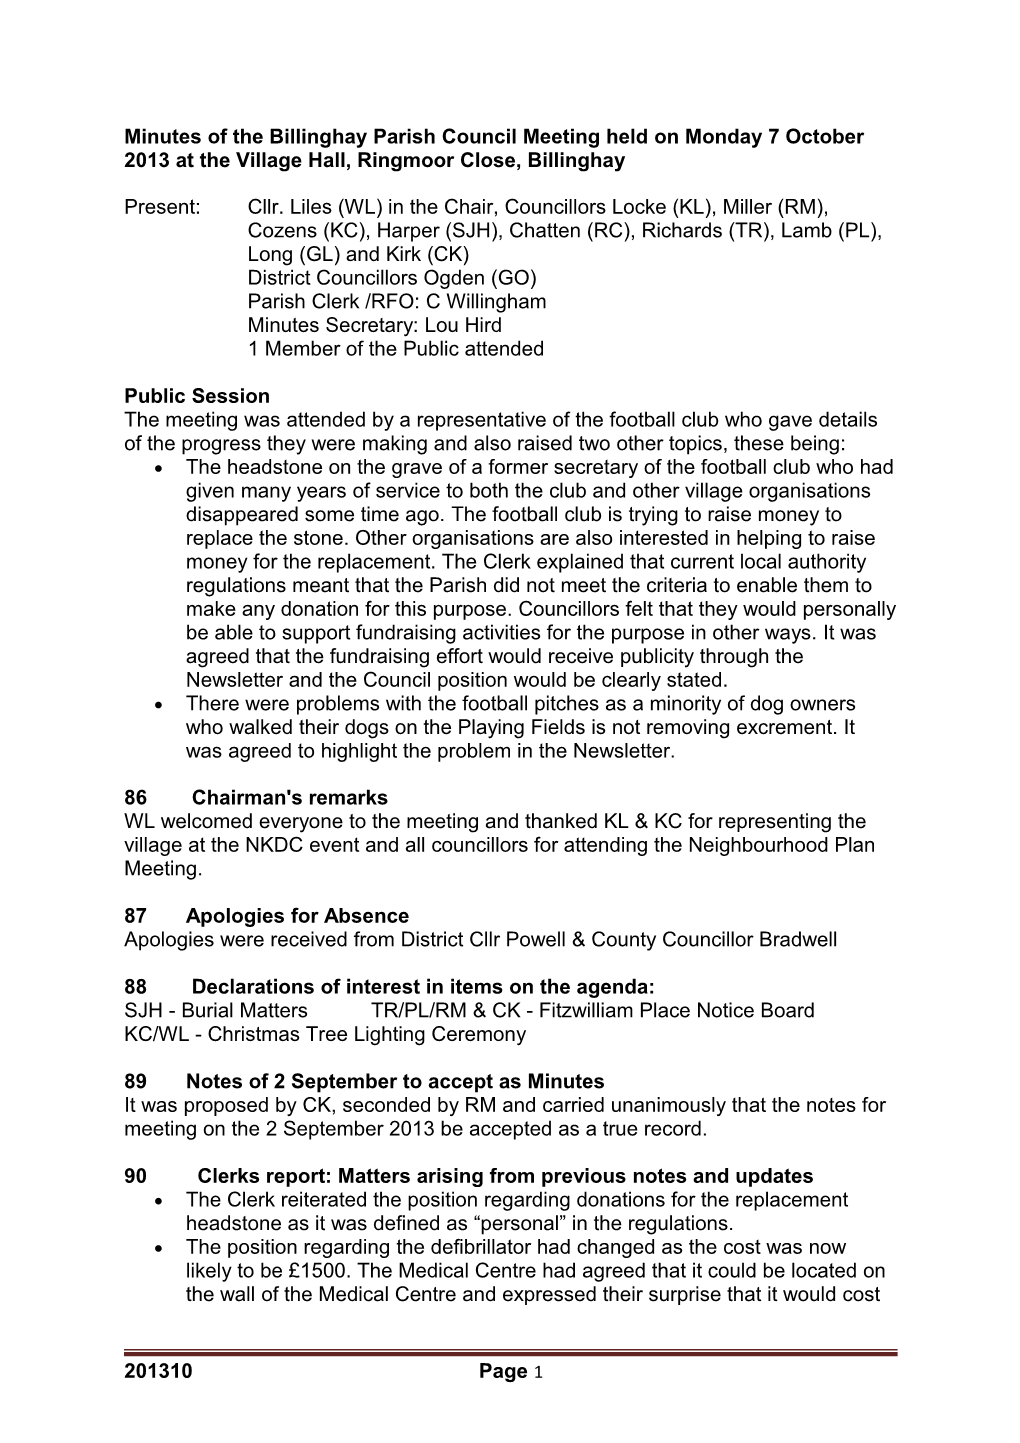 Minutes of the Billinghay Parish Council Meeting Held on Monday 7 October 2013 at The